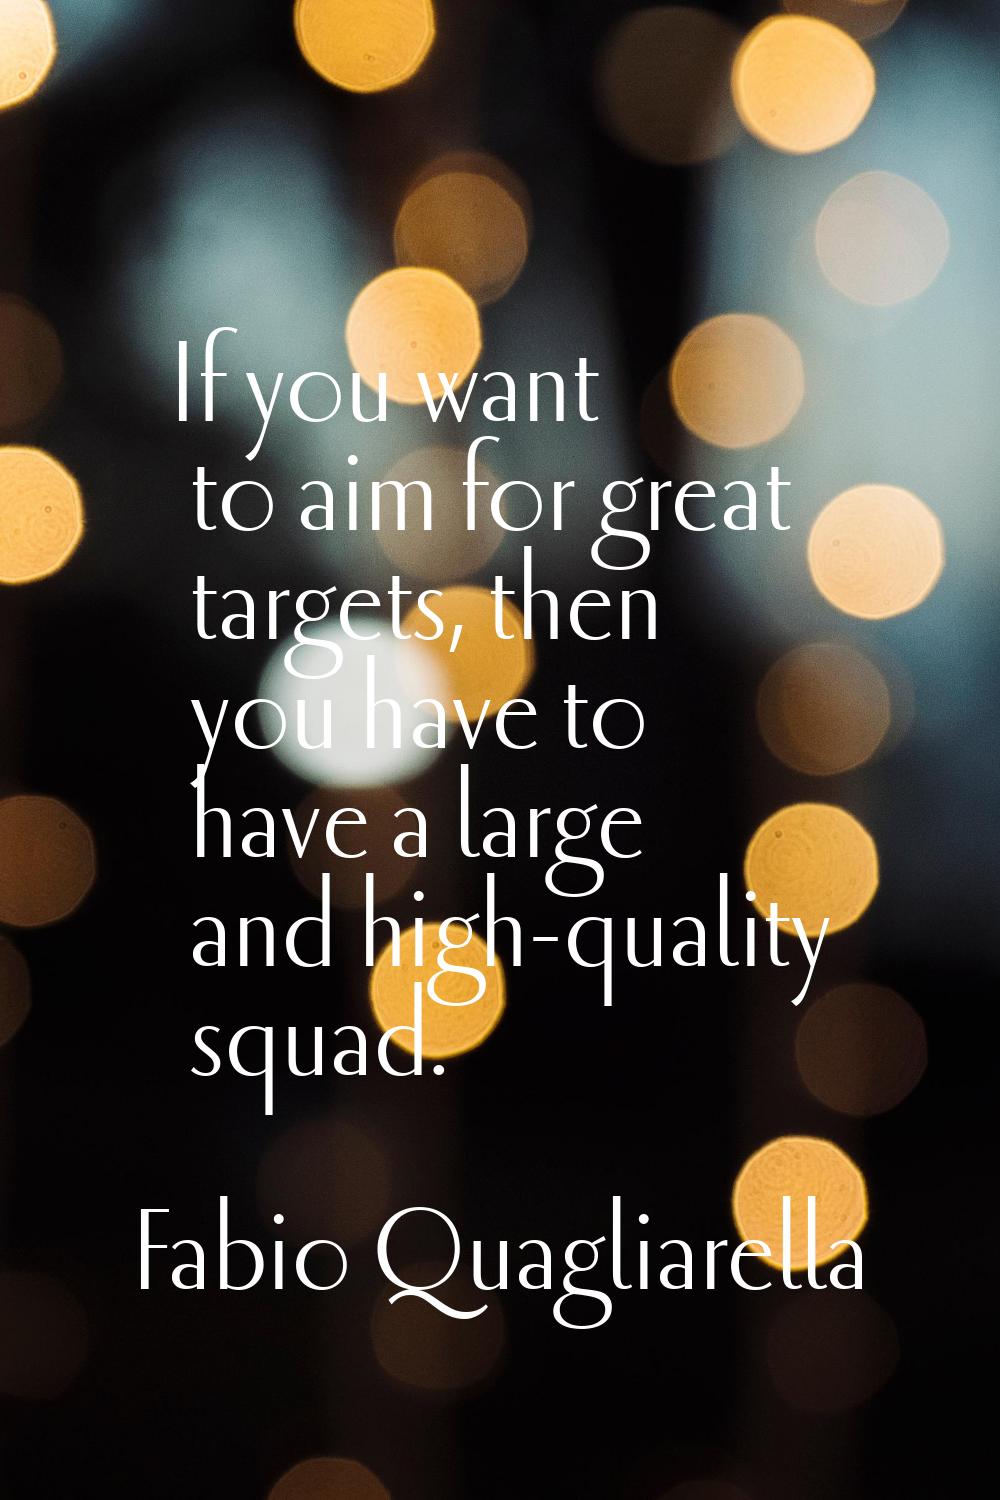 If you want to aim for great targets, then you have to have a large and high-quality squad.